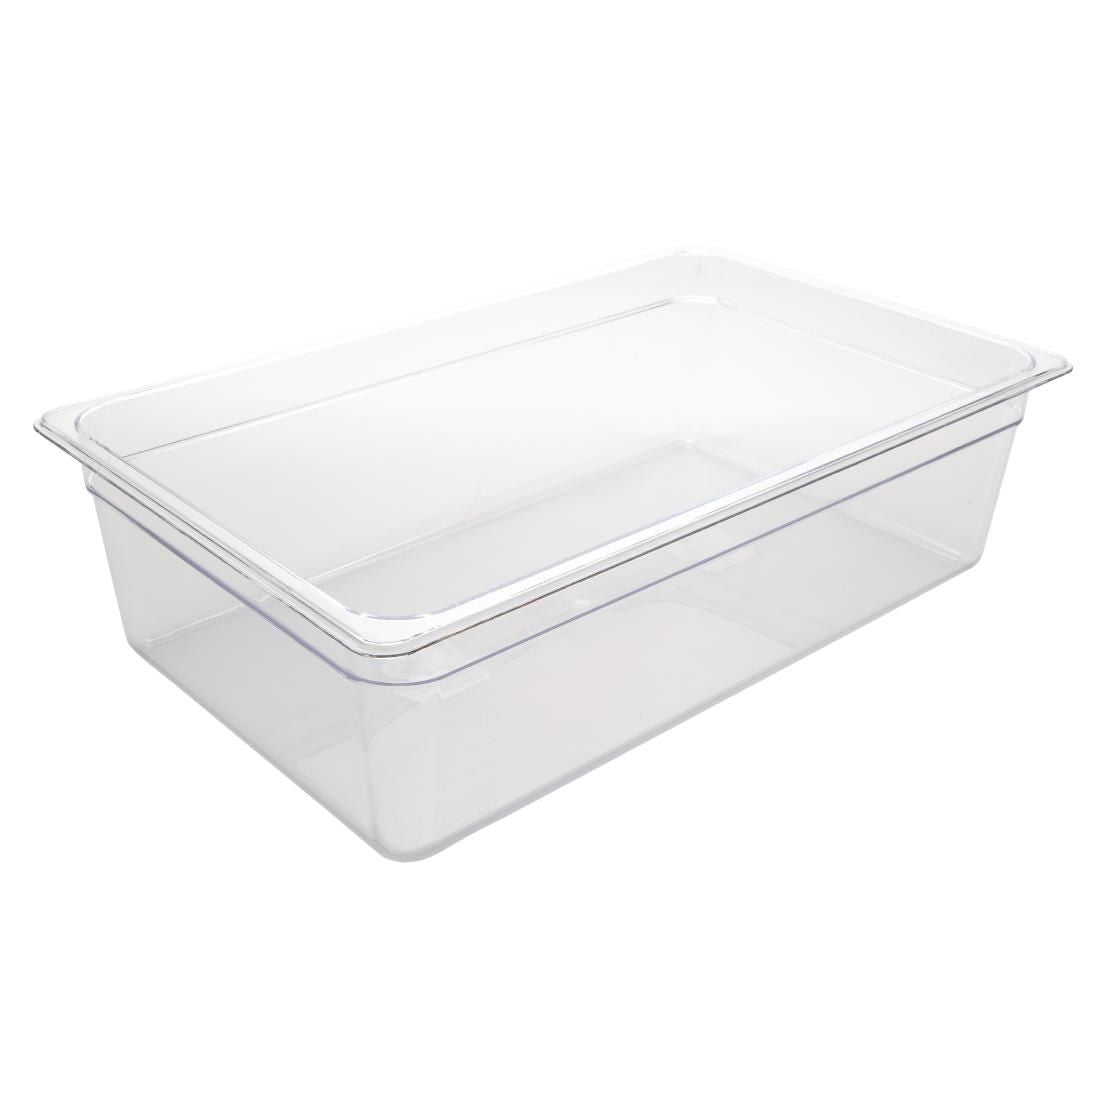 U226 Vogue Polycarbonate 1/1 Gastronorm Container 150mm Clear